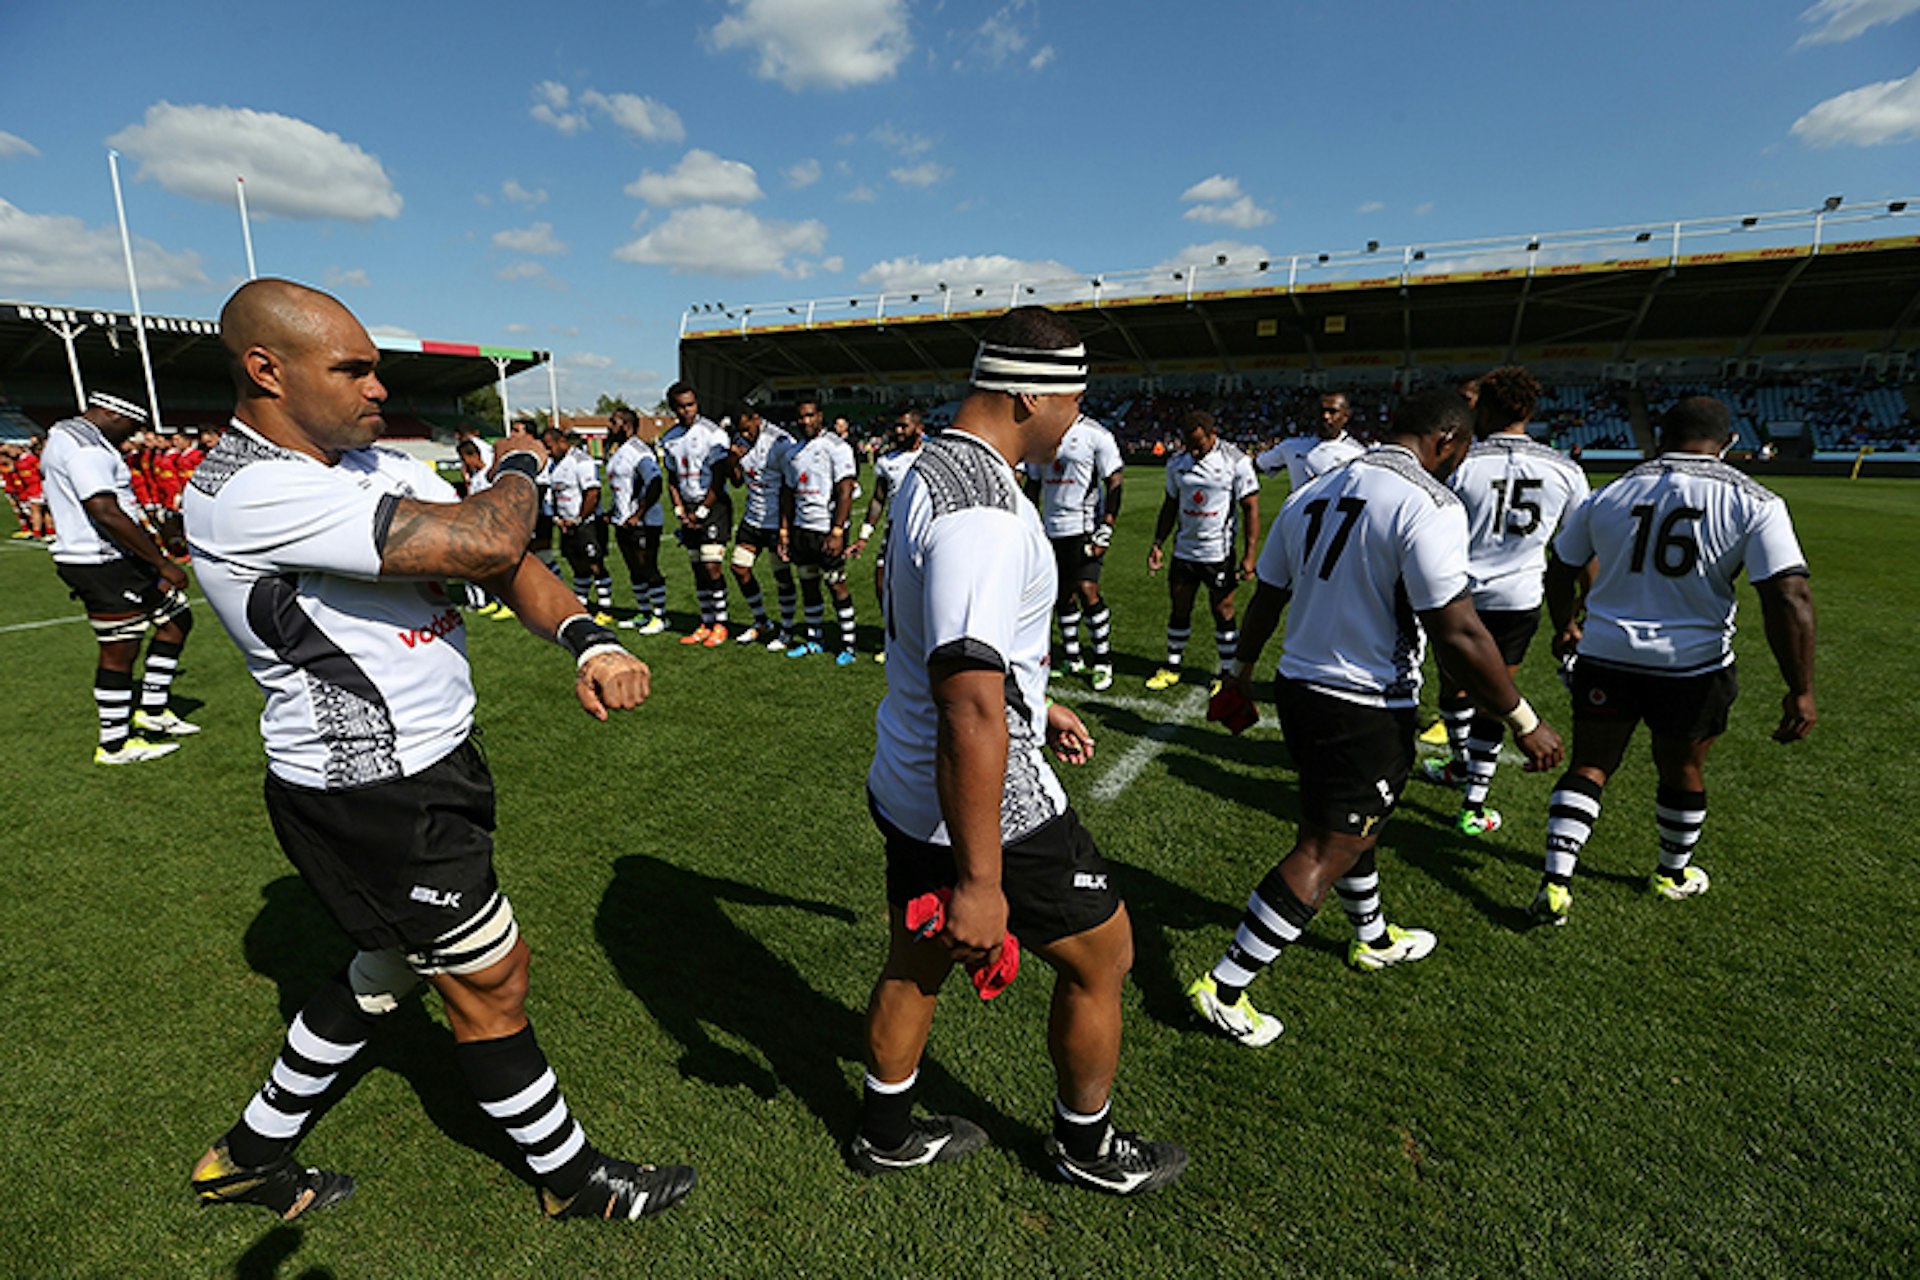 The Fijian rugby team taking part in an international match against Canada in London. 